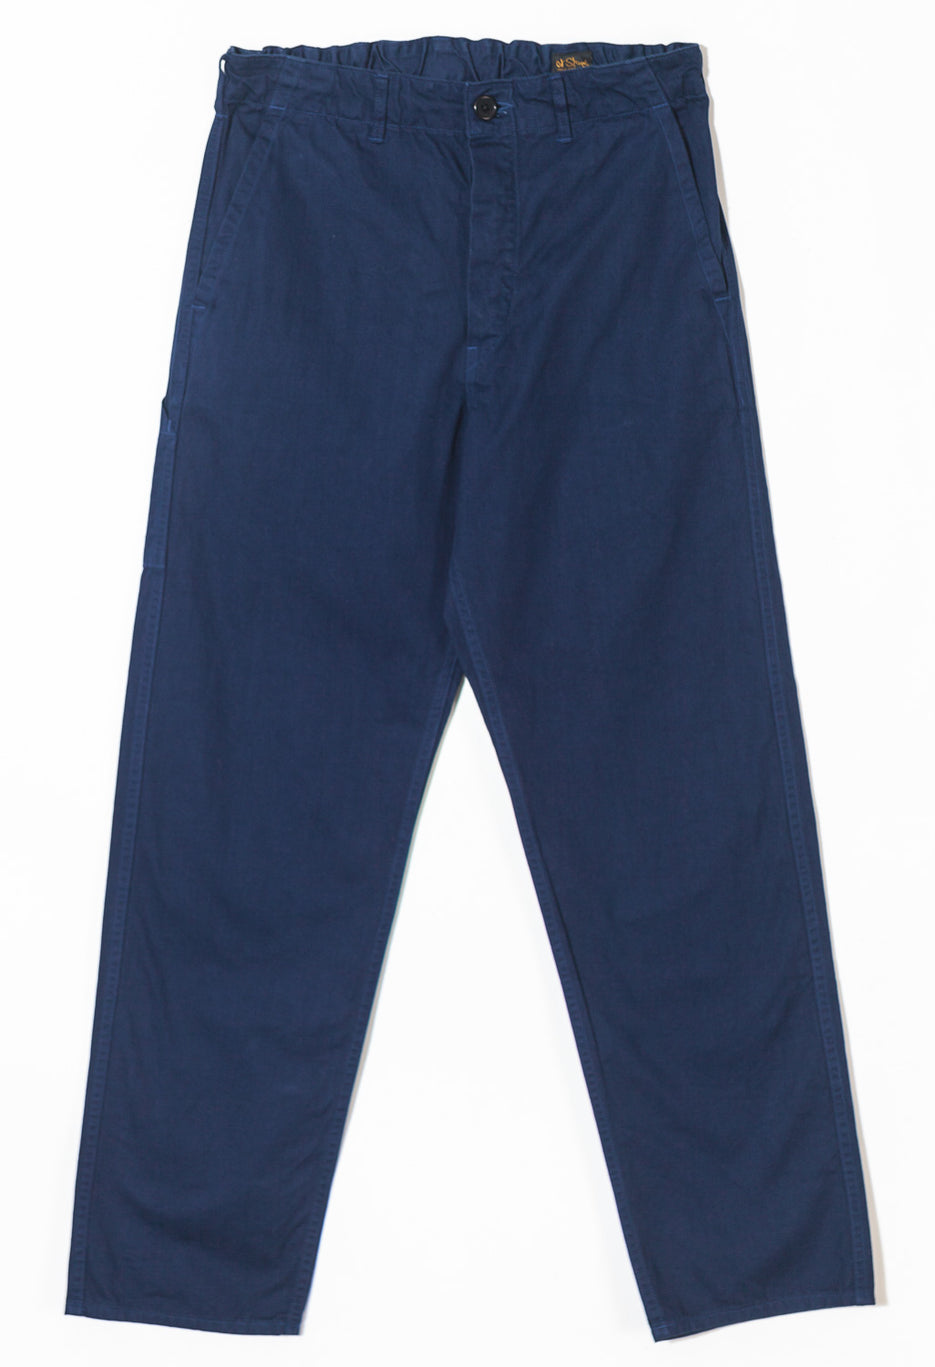 orSlow French Work Pants 2